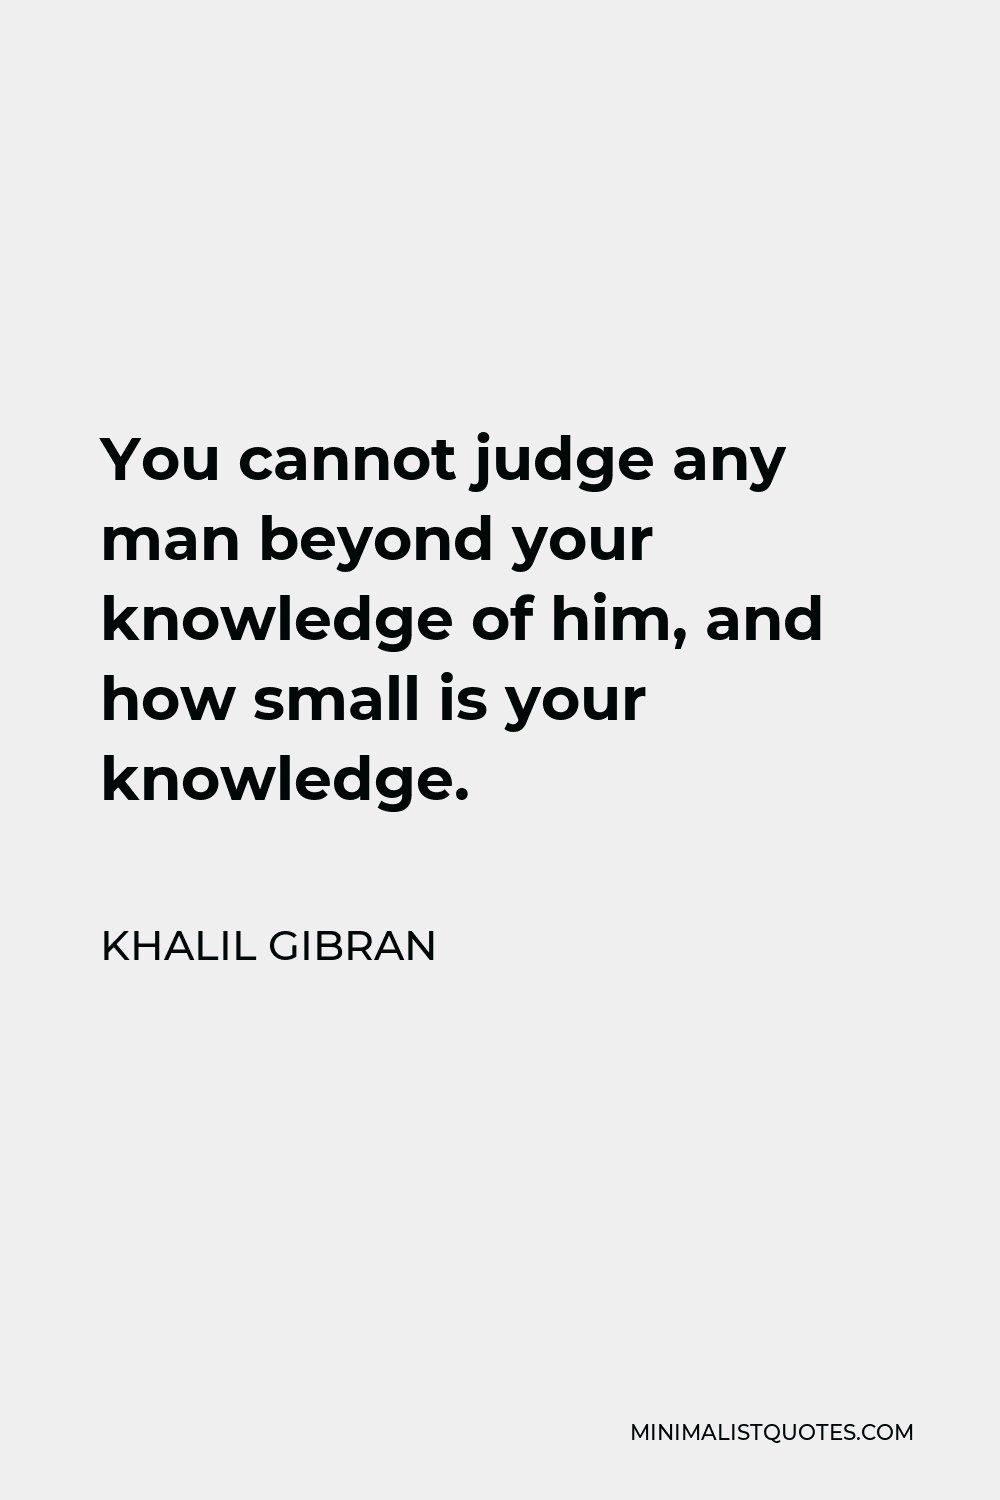 Khalil Gibran Quote - You cannot judge any man beyond your knowledge of him, and how small is your knowledge.